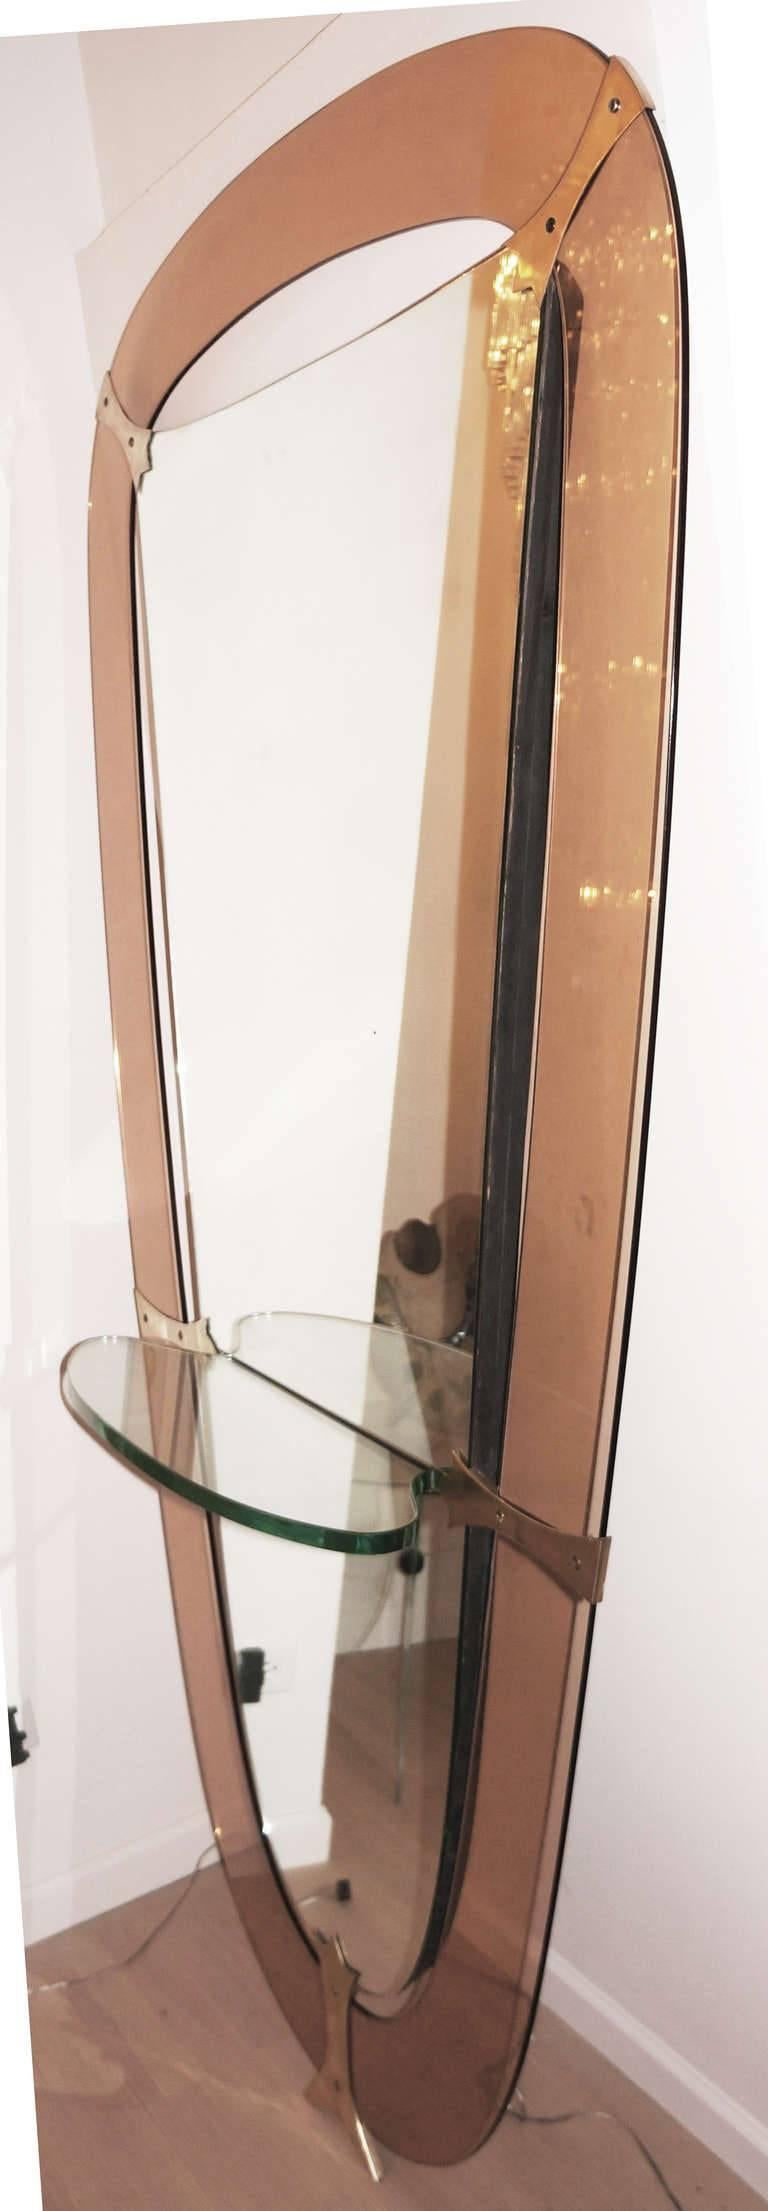 Mid-Century Modern Large Cristal Art Mirror and Console, Italy, 1950s